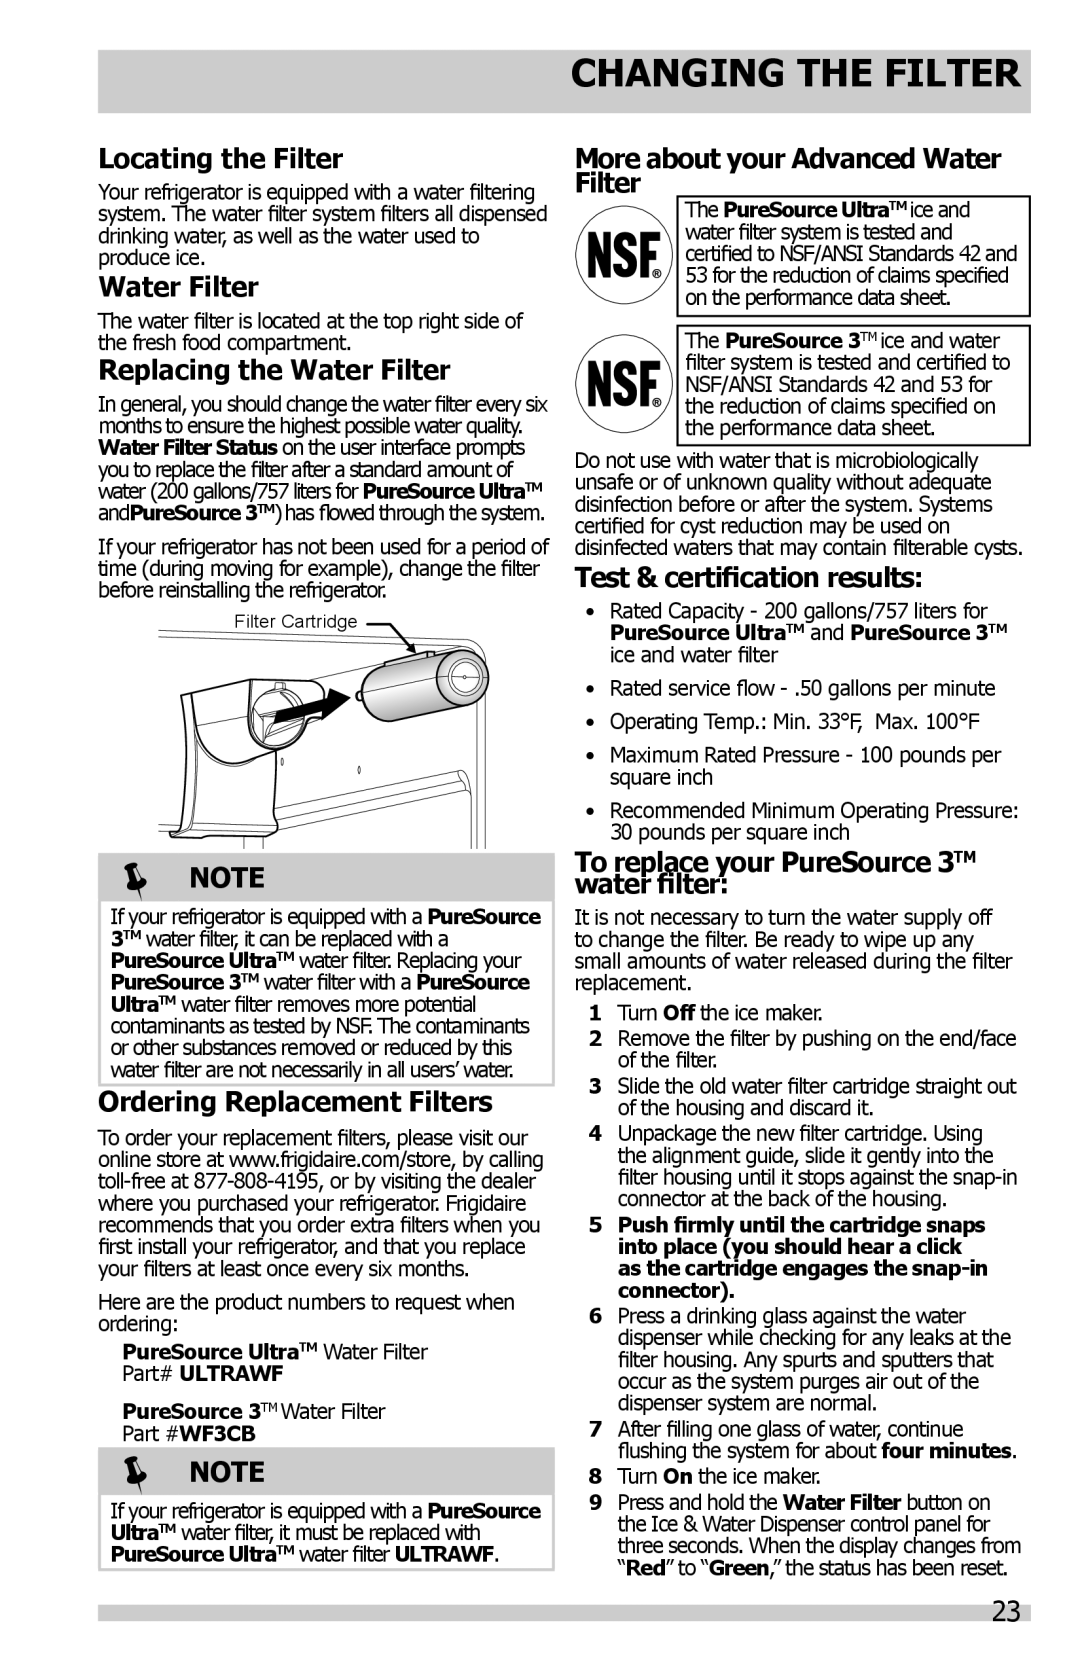 Frigidaire FFHS2622MW, FFHS2622MS Changing The Filter, Locating the Filter, Replacing the Water Filter,  Note 